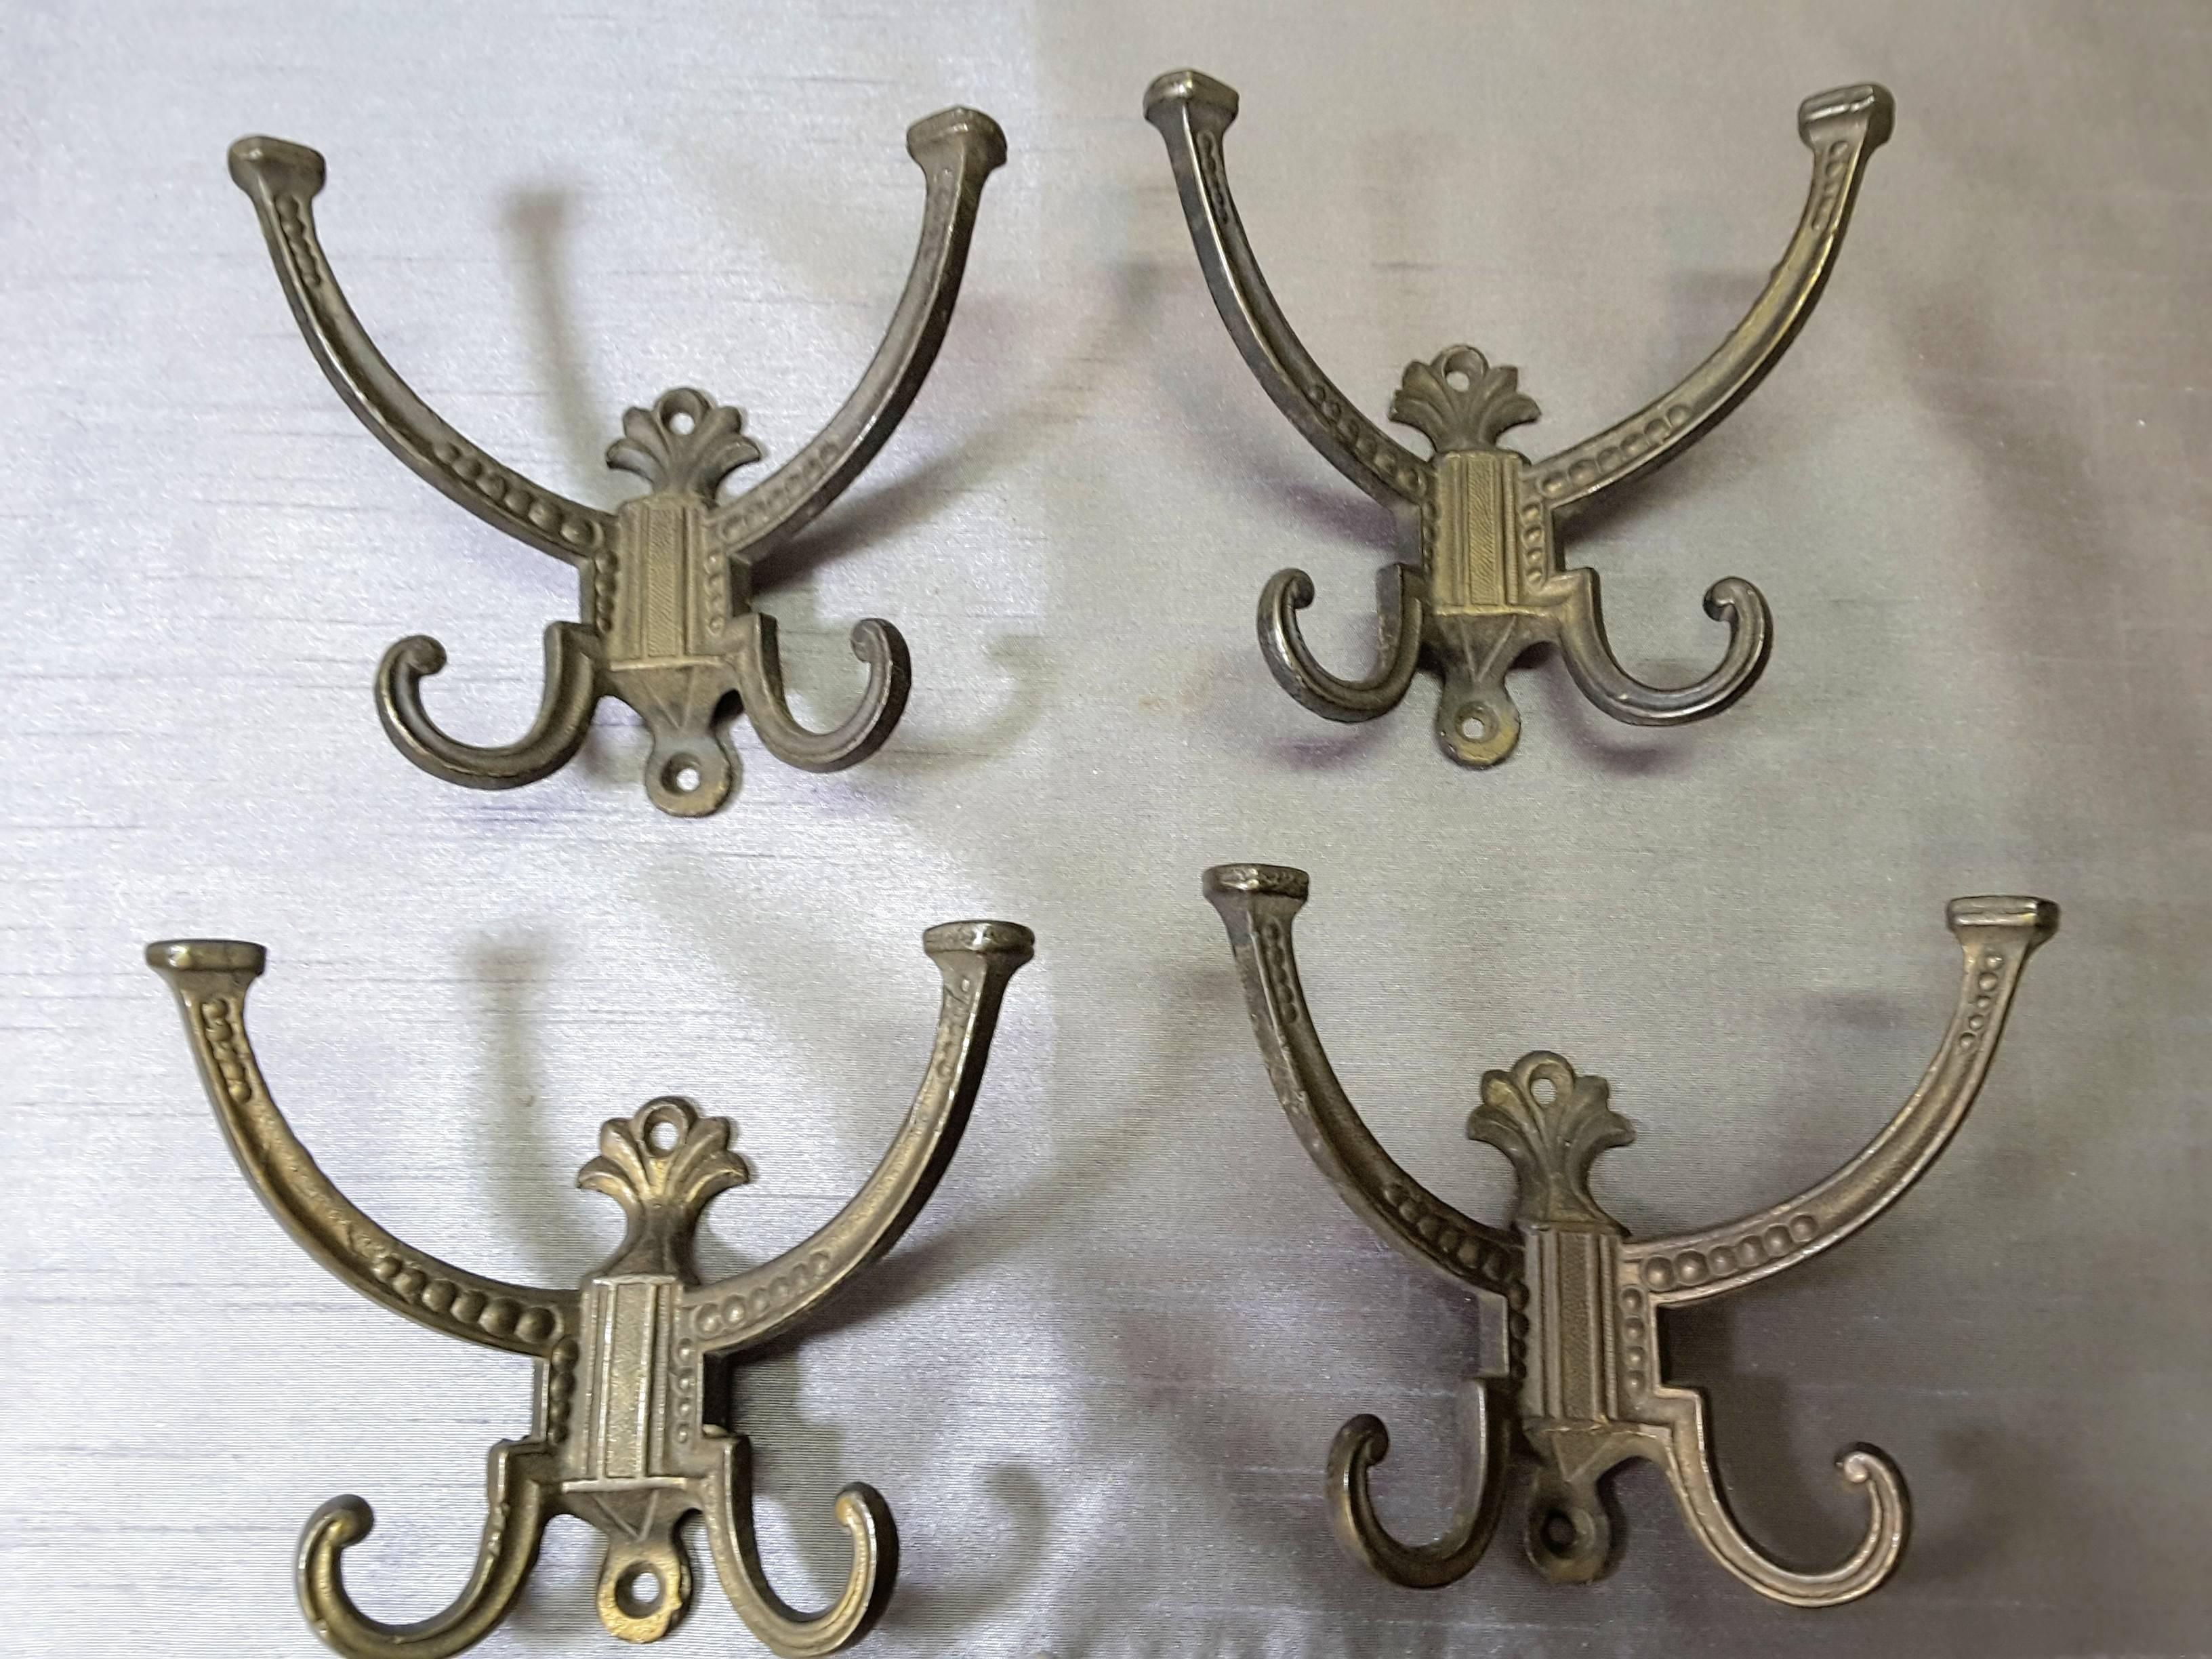 Victorian hallstand or coat stand hooks, set of four, dated 1878 and marked H.B. The hooks are four prongs on each hook, with upper and lower screw mount holes, made of cast iron, each hook is marked on the back centre. The hallstand hooks measure 5